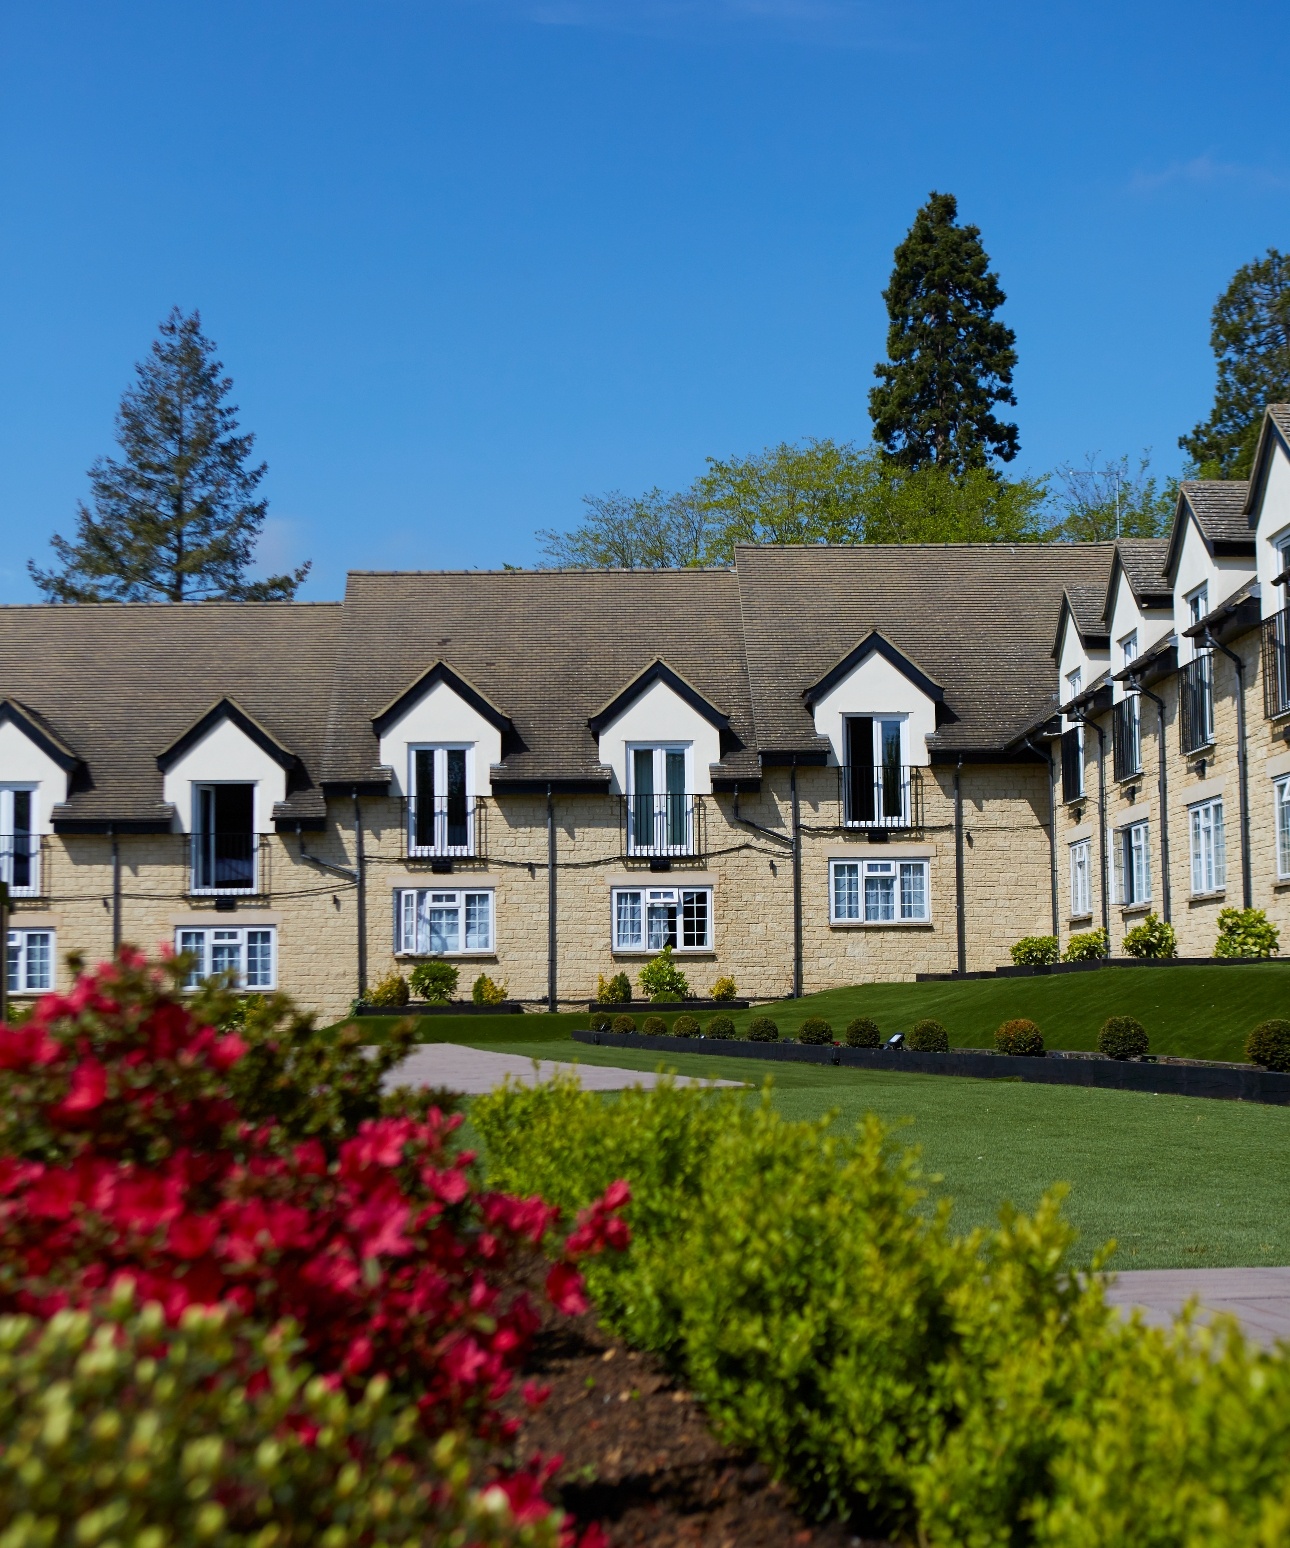 The Chesterton Hotel is built of cotswold stone with each window having a juliette balcony and french doors